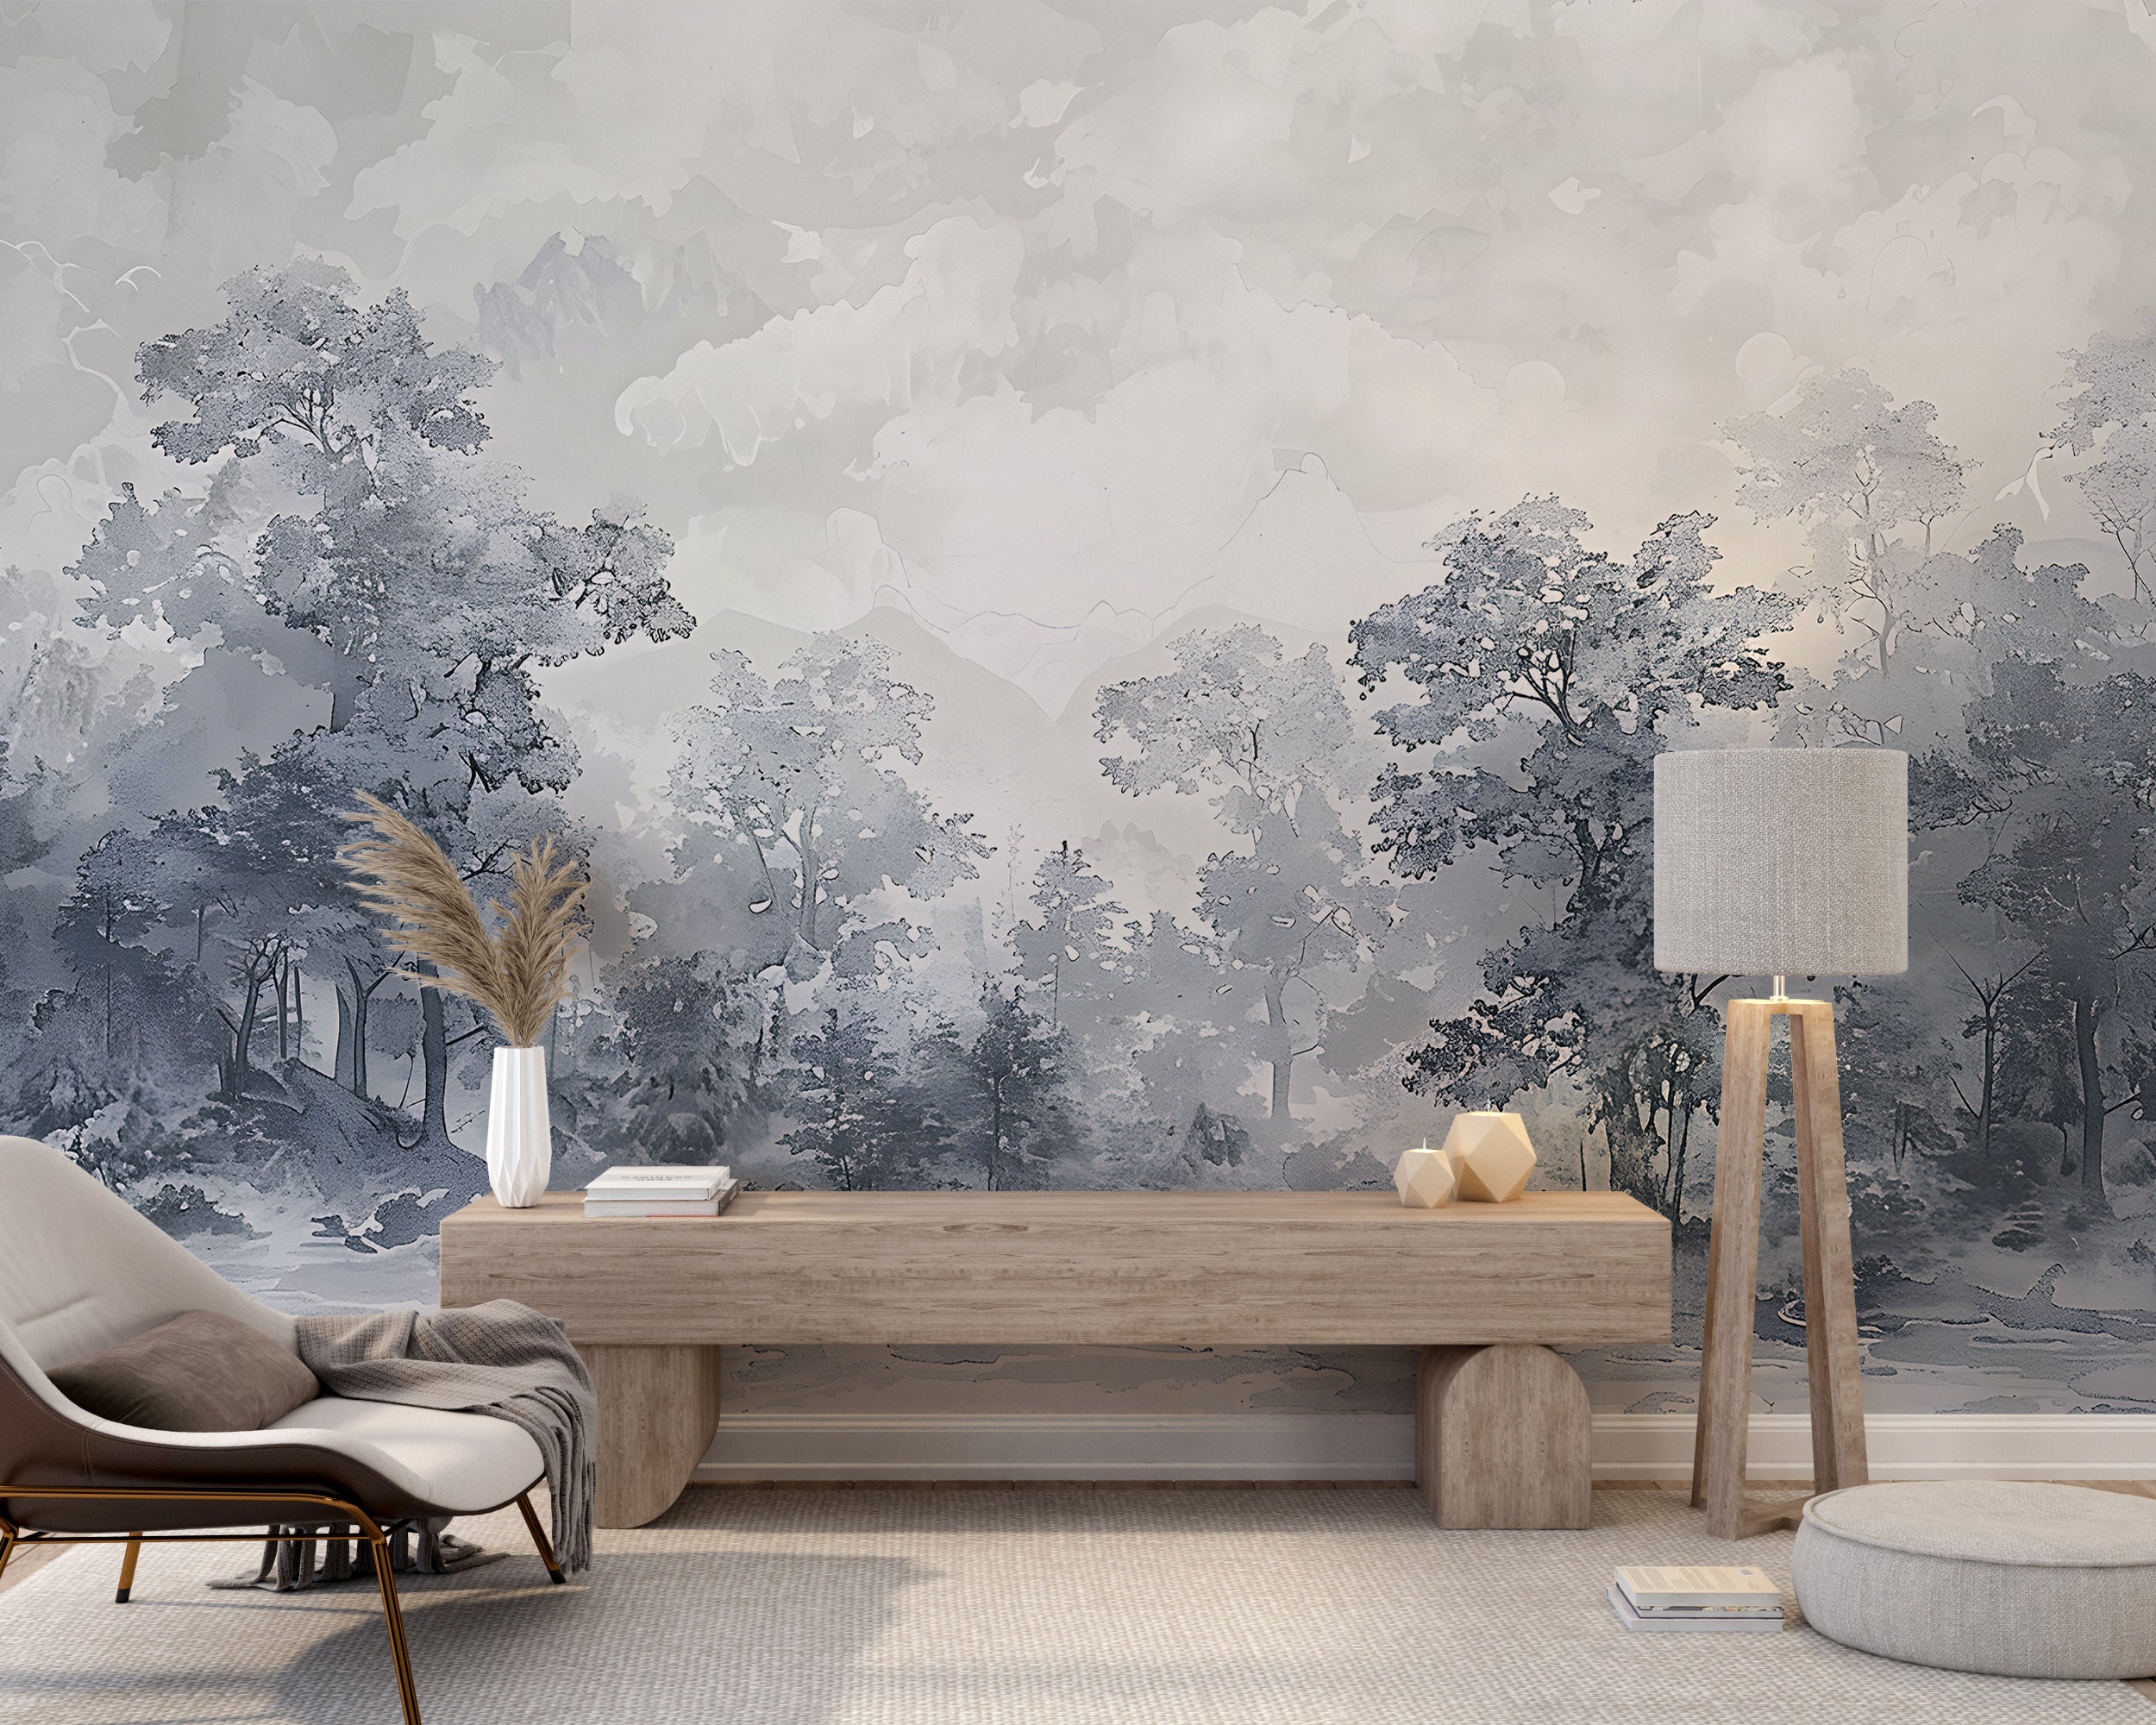 Misty grey forest mural